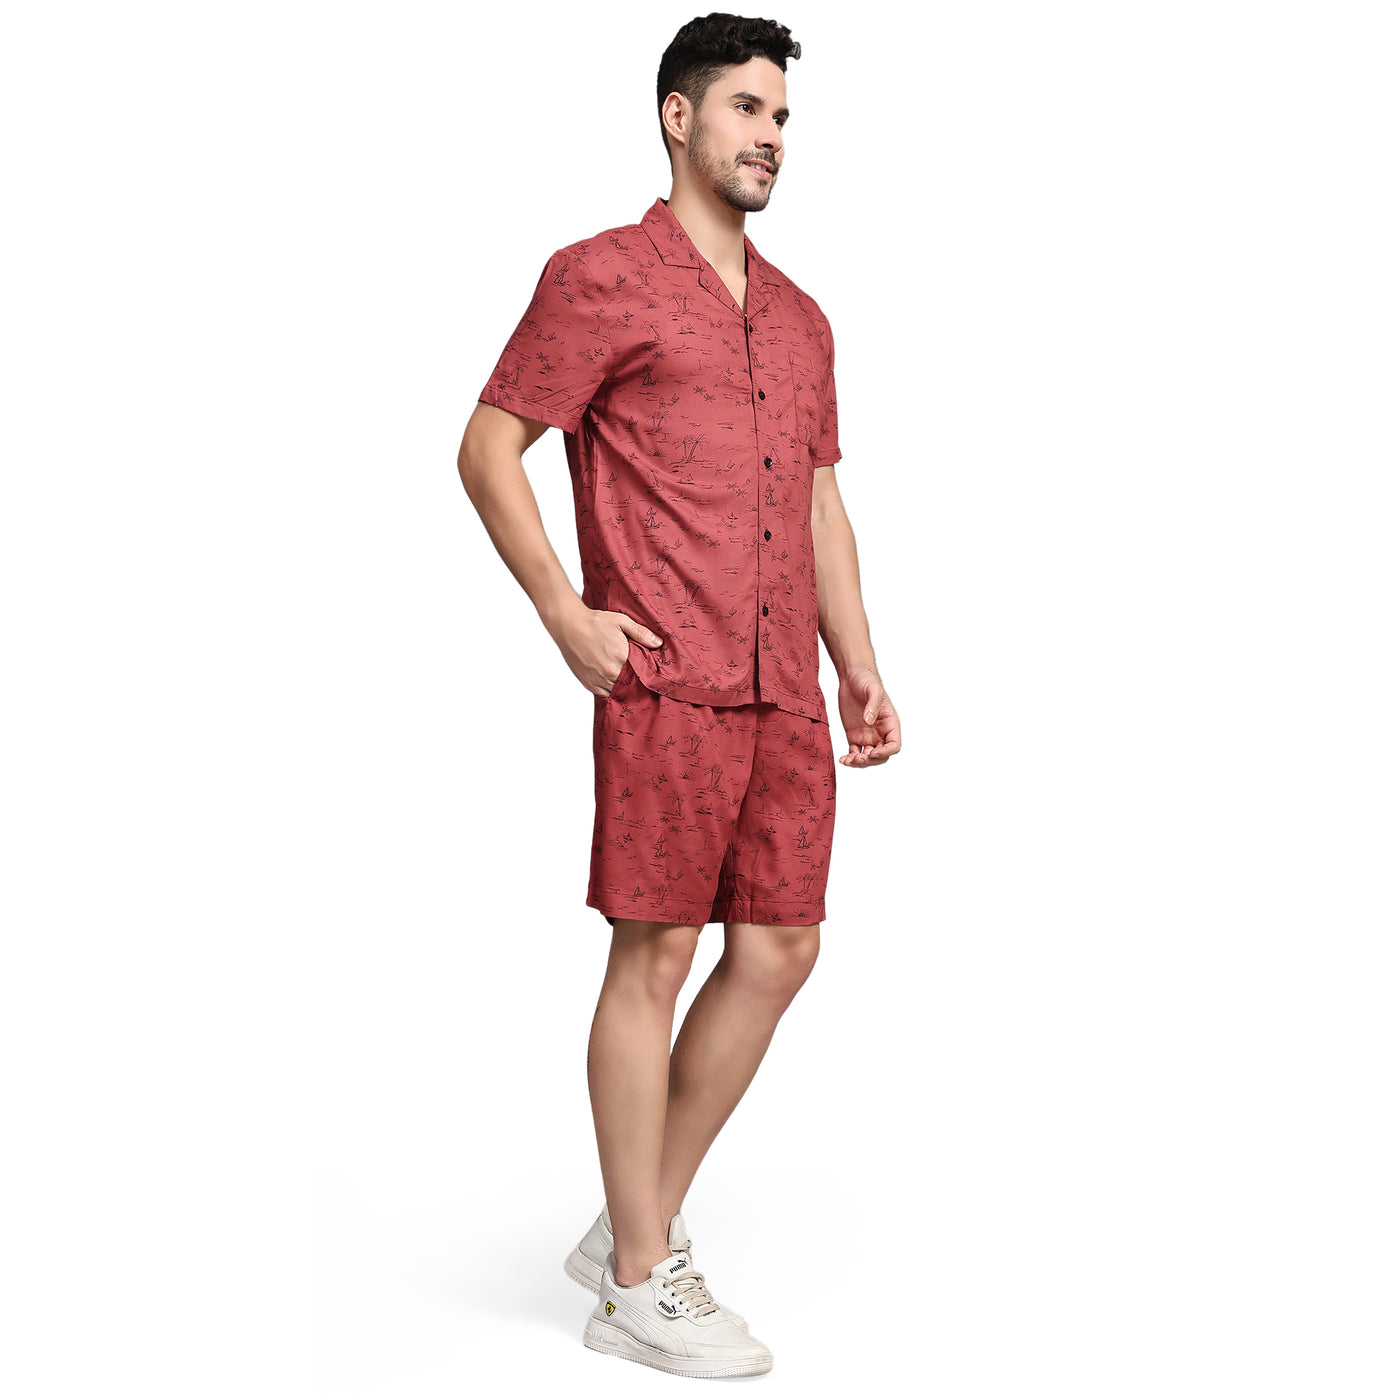 Co-ord Set for Men - Maroon Printed